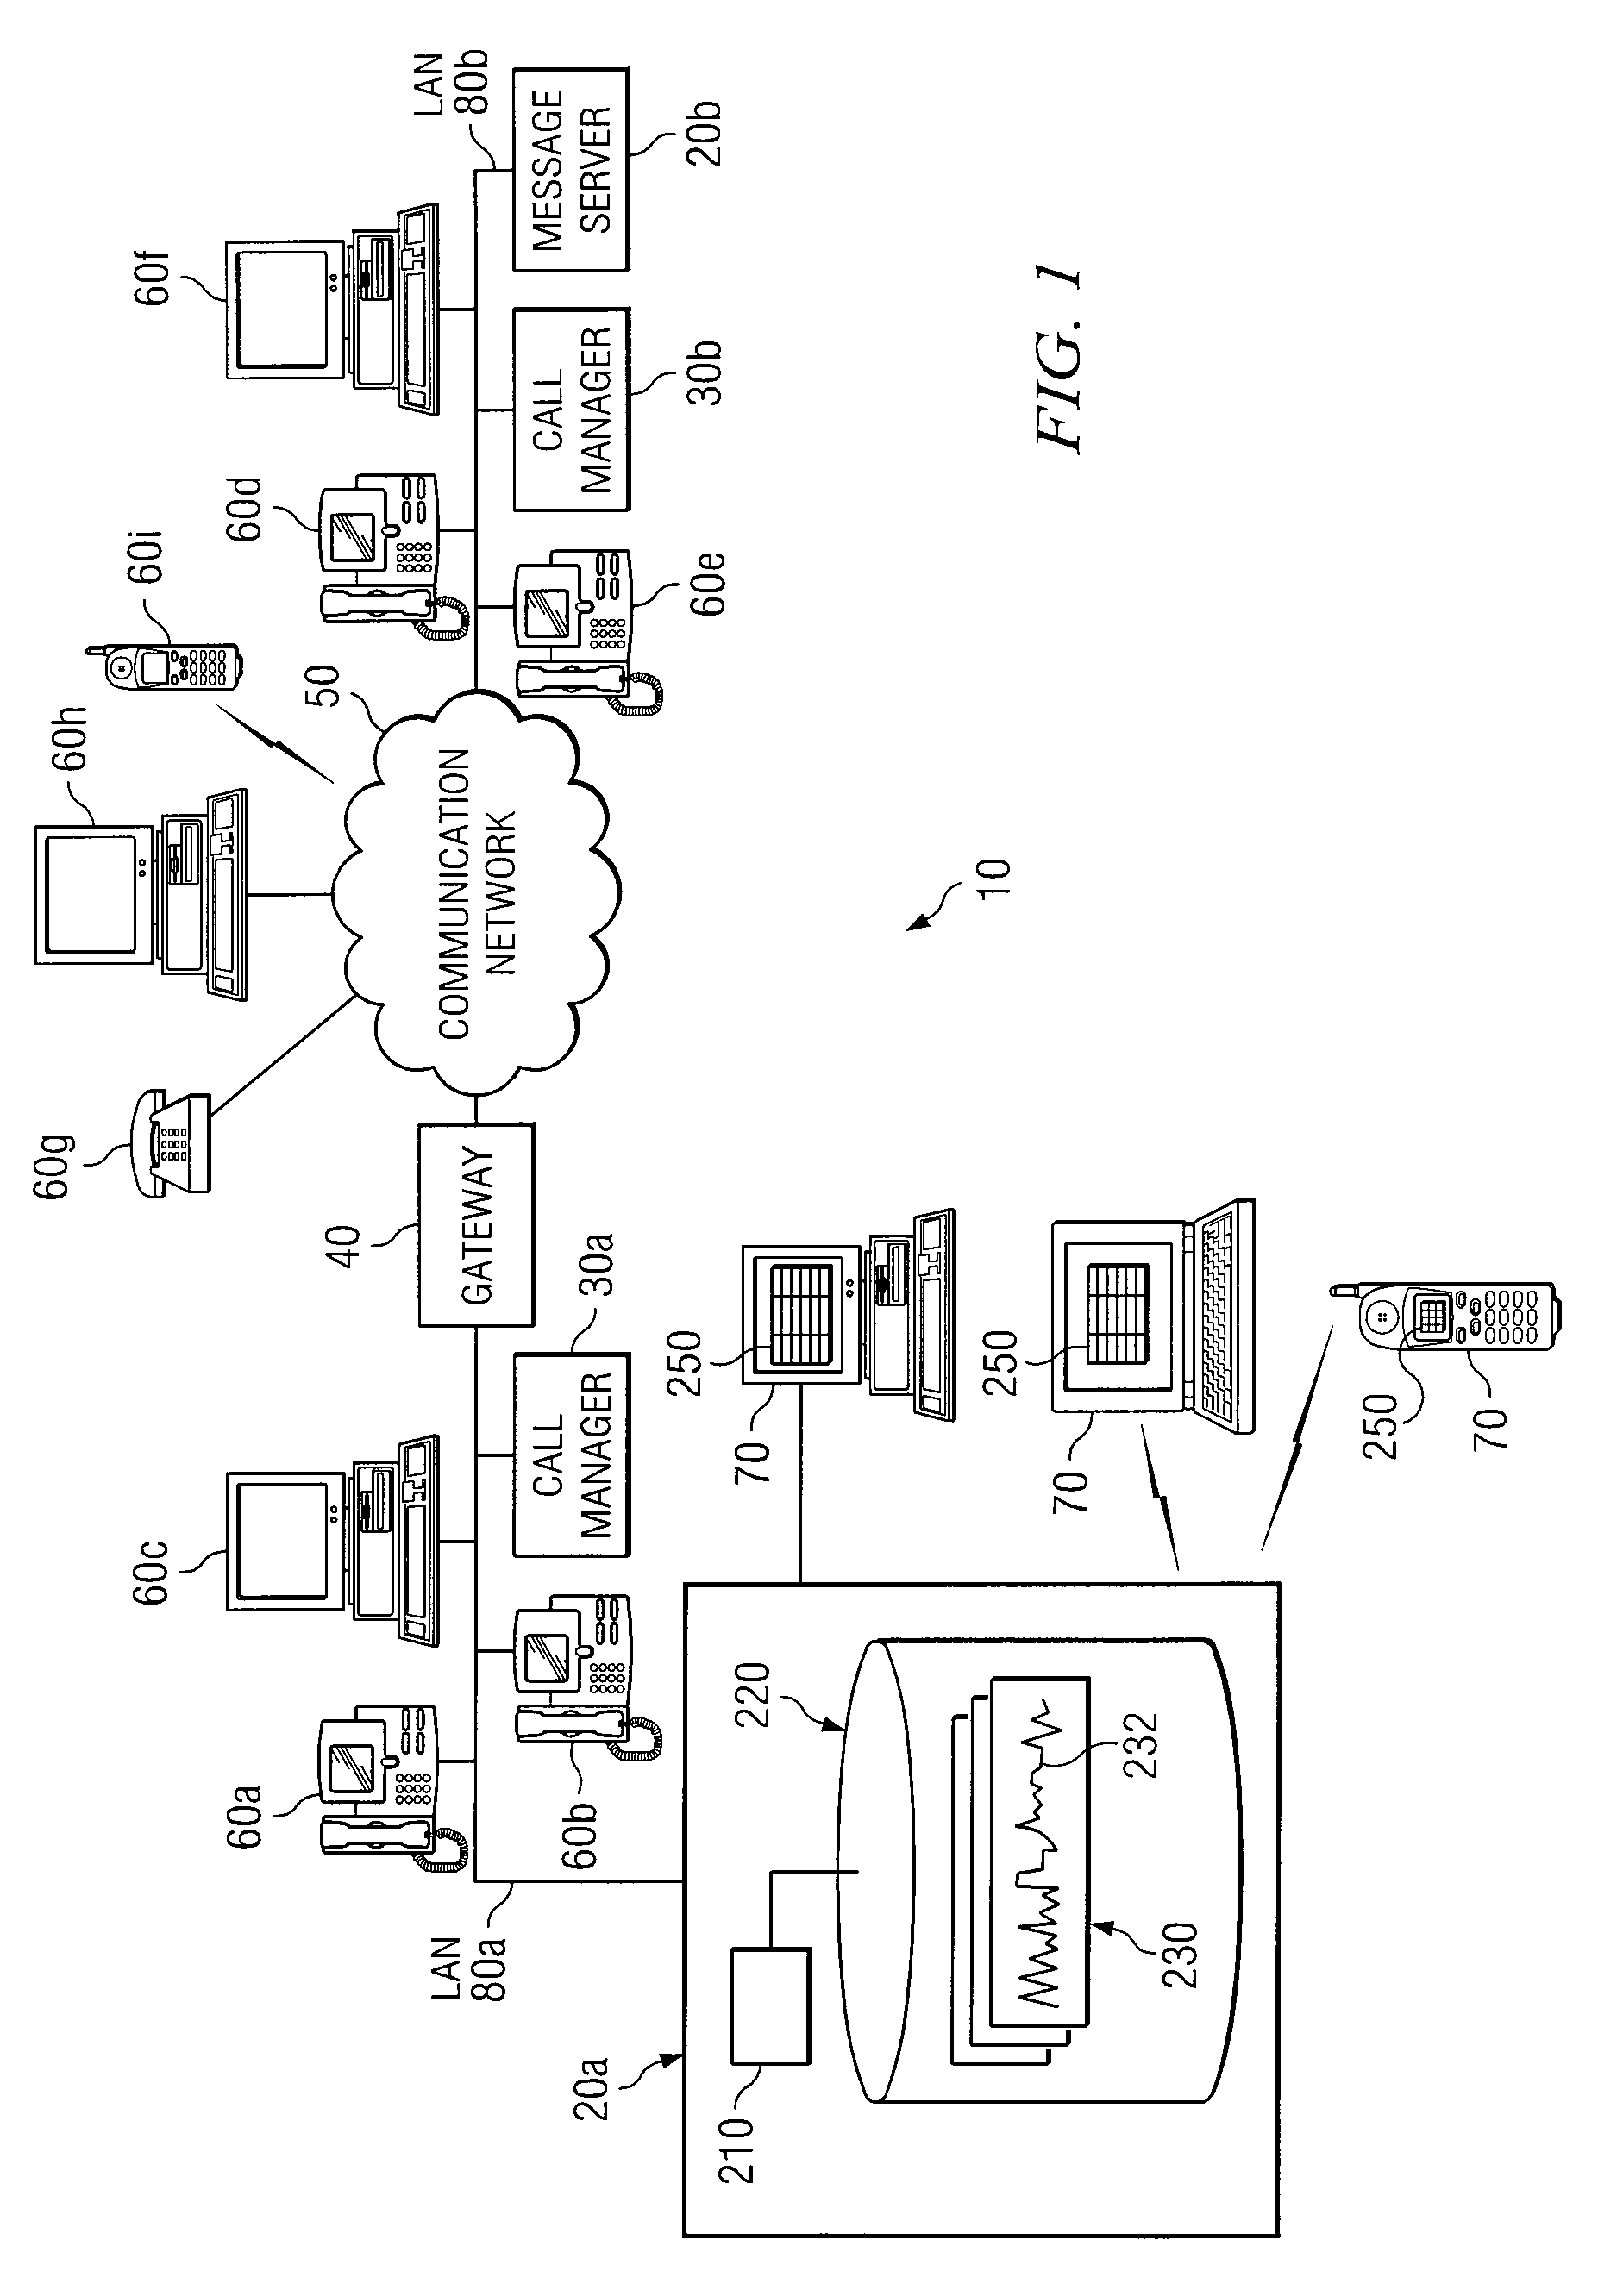 Method and System for Grouping Voice Messages